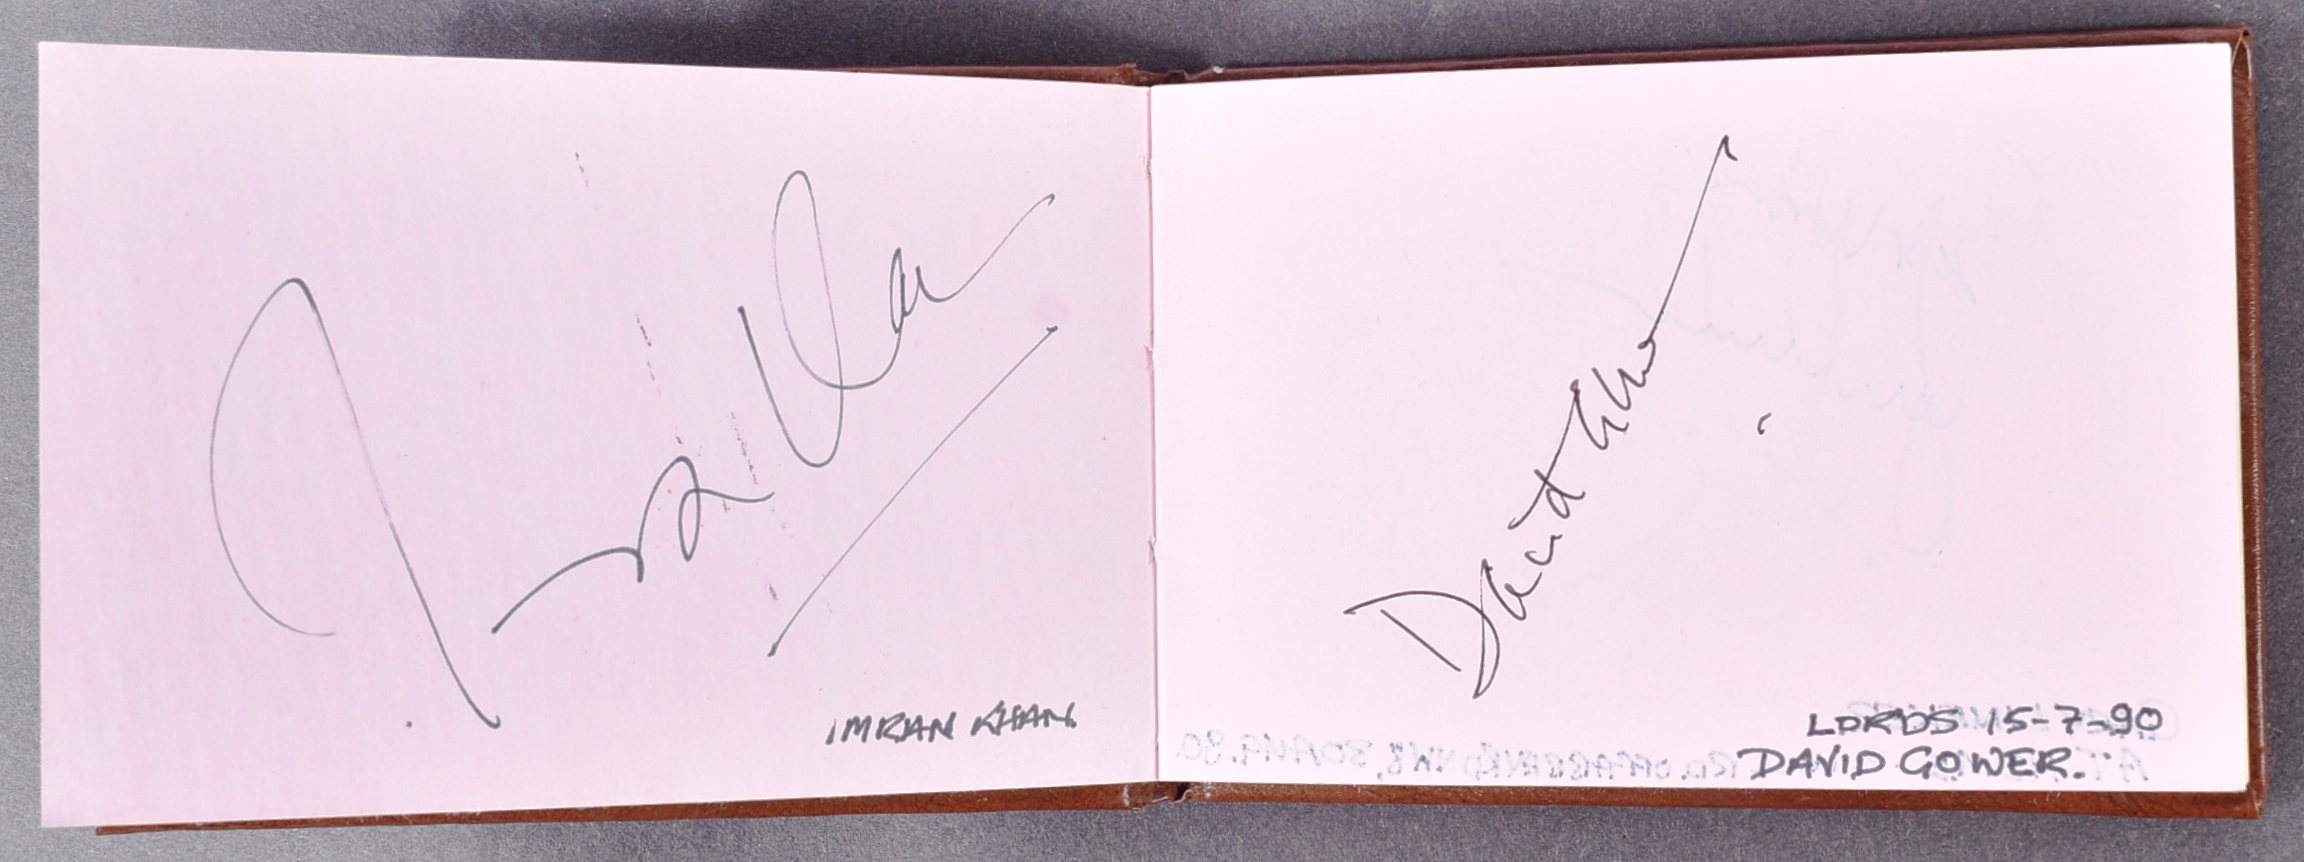 GERALD WHITNEY COLLECTION (CAMERA MAN) - AUTOGRAPH BOOK - Image 3 of 8